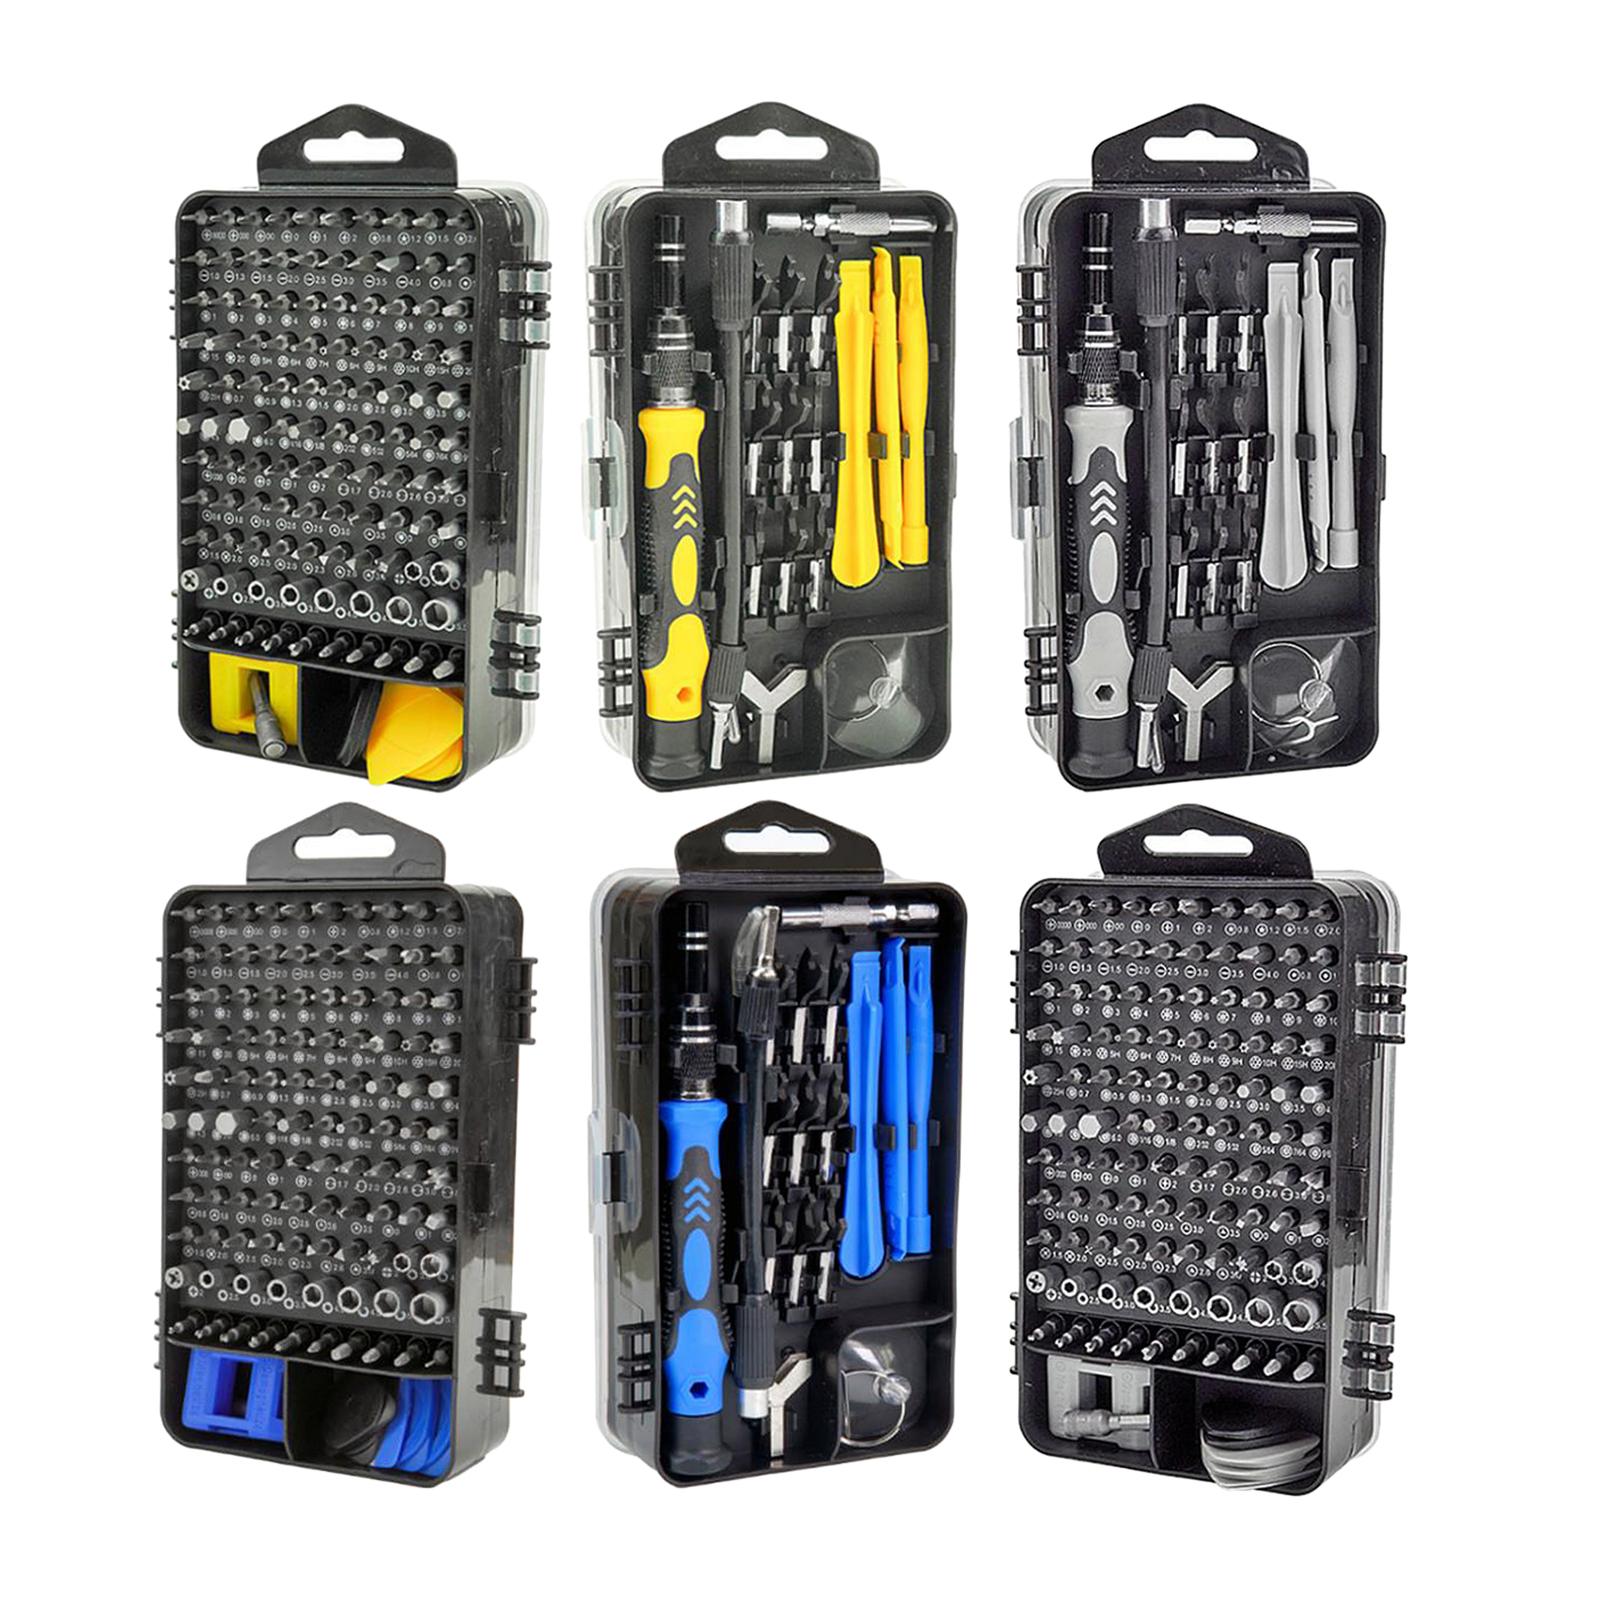 138 in 1 Screwdriver Kit Repair Tool Kits with Case for Cellphone DIY Laptop Blue